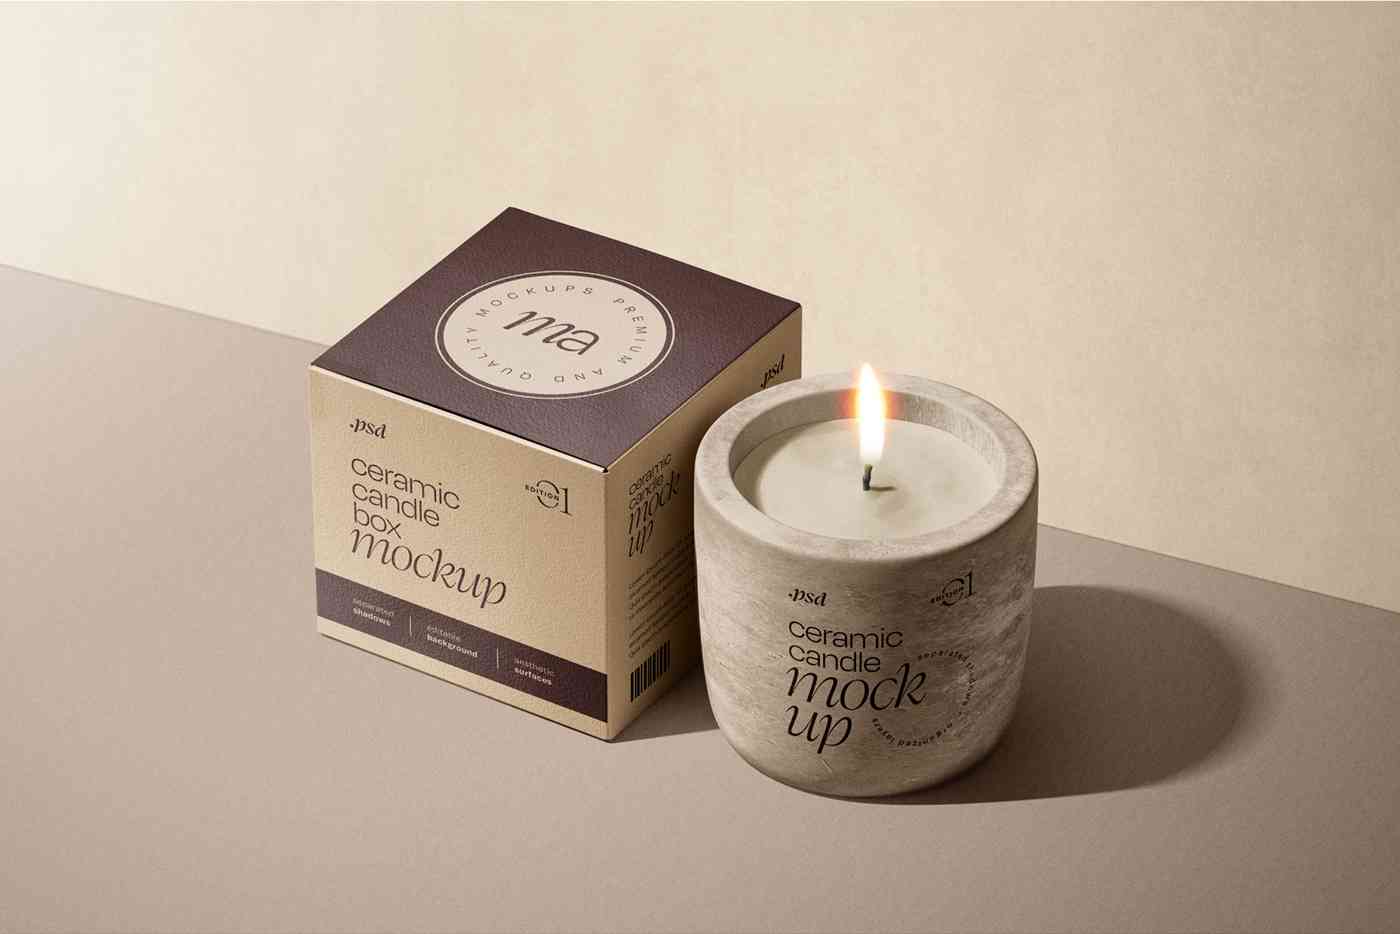 Download a Free Candle Mockup PSD File - Perfect for Your Design